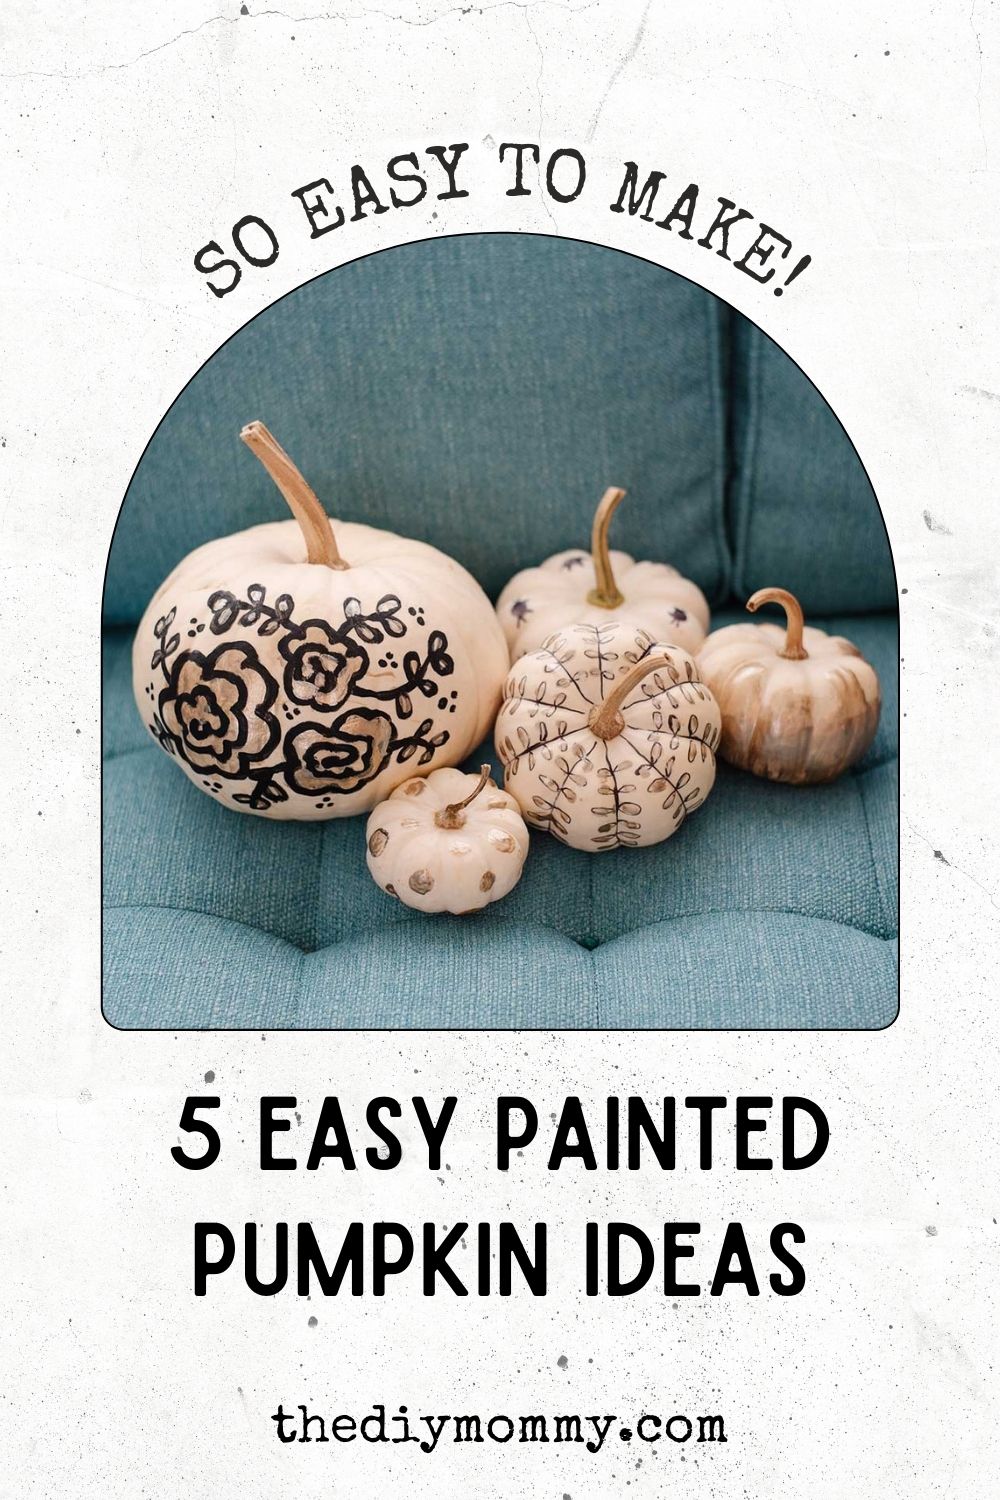 easy pumpkin painting ideas with easy to make, step-by-step instructions